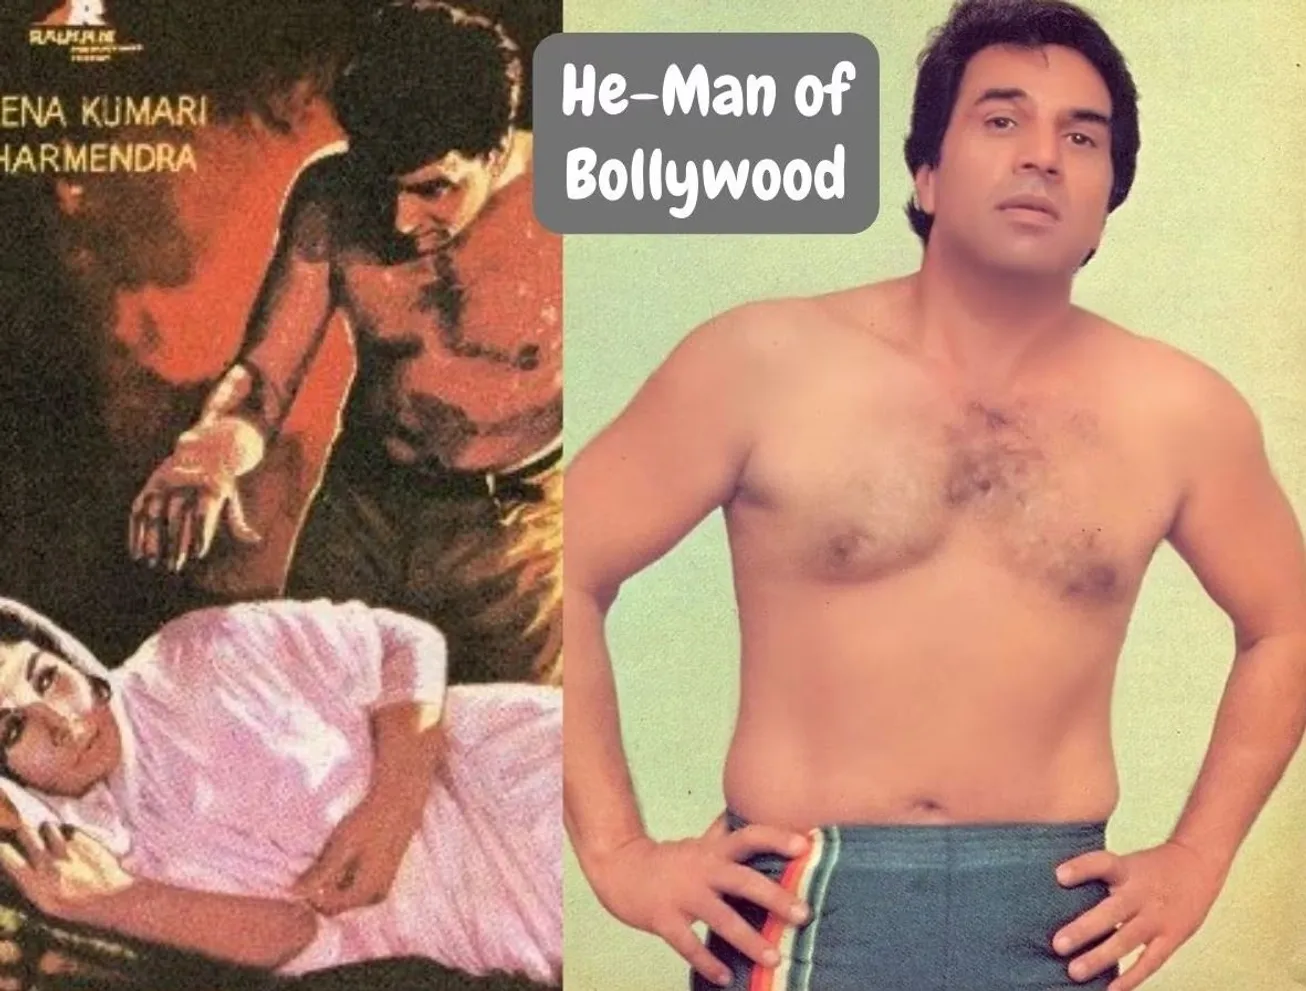 He-Man of Bollywood